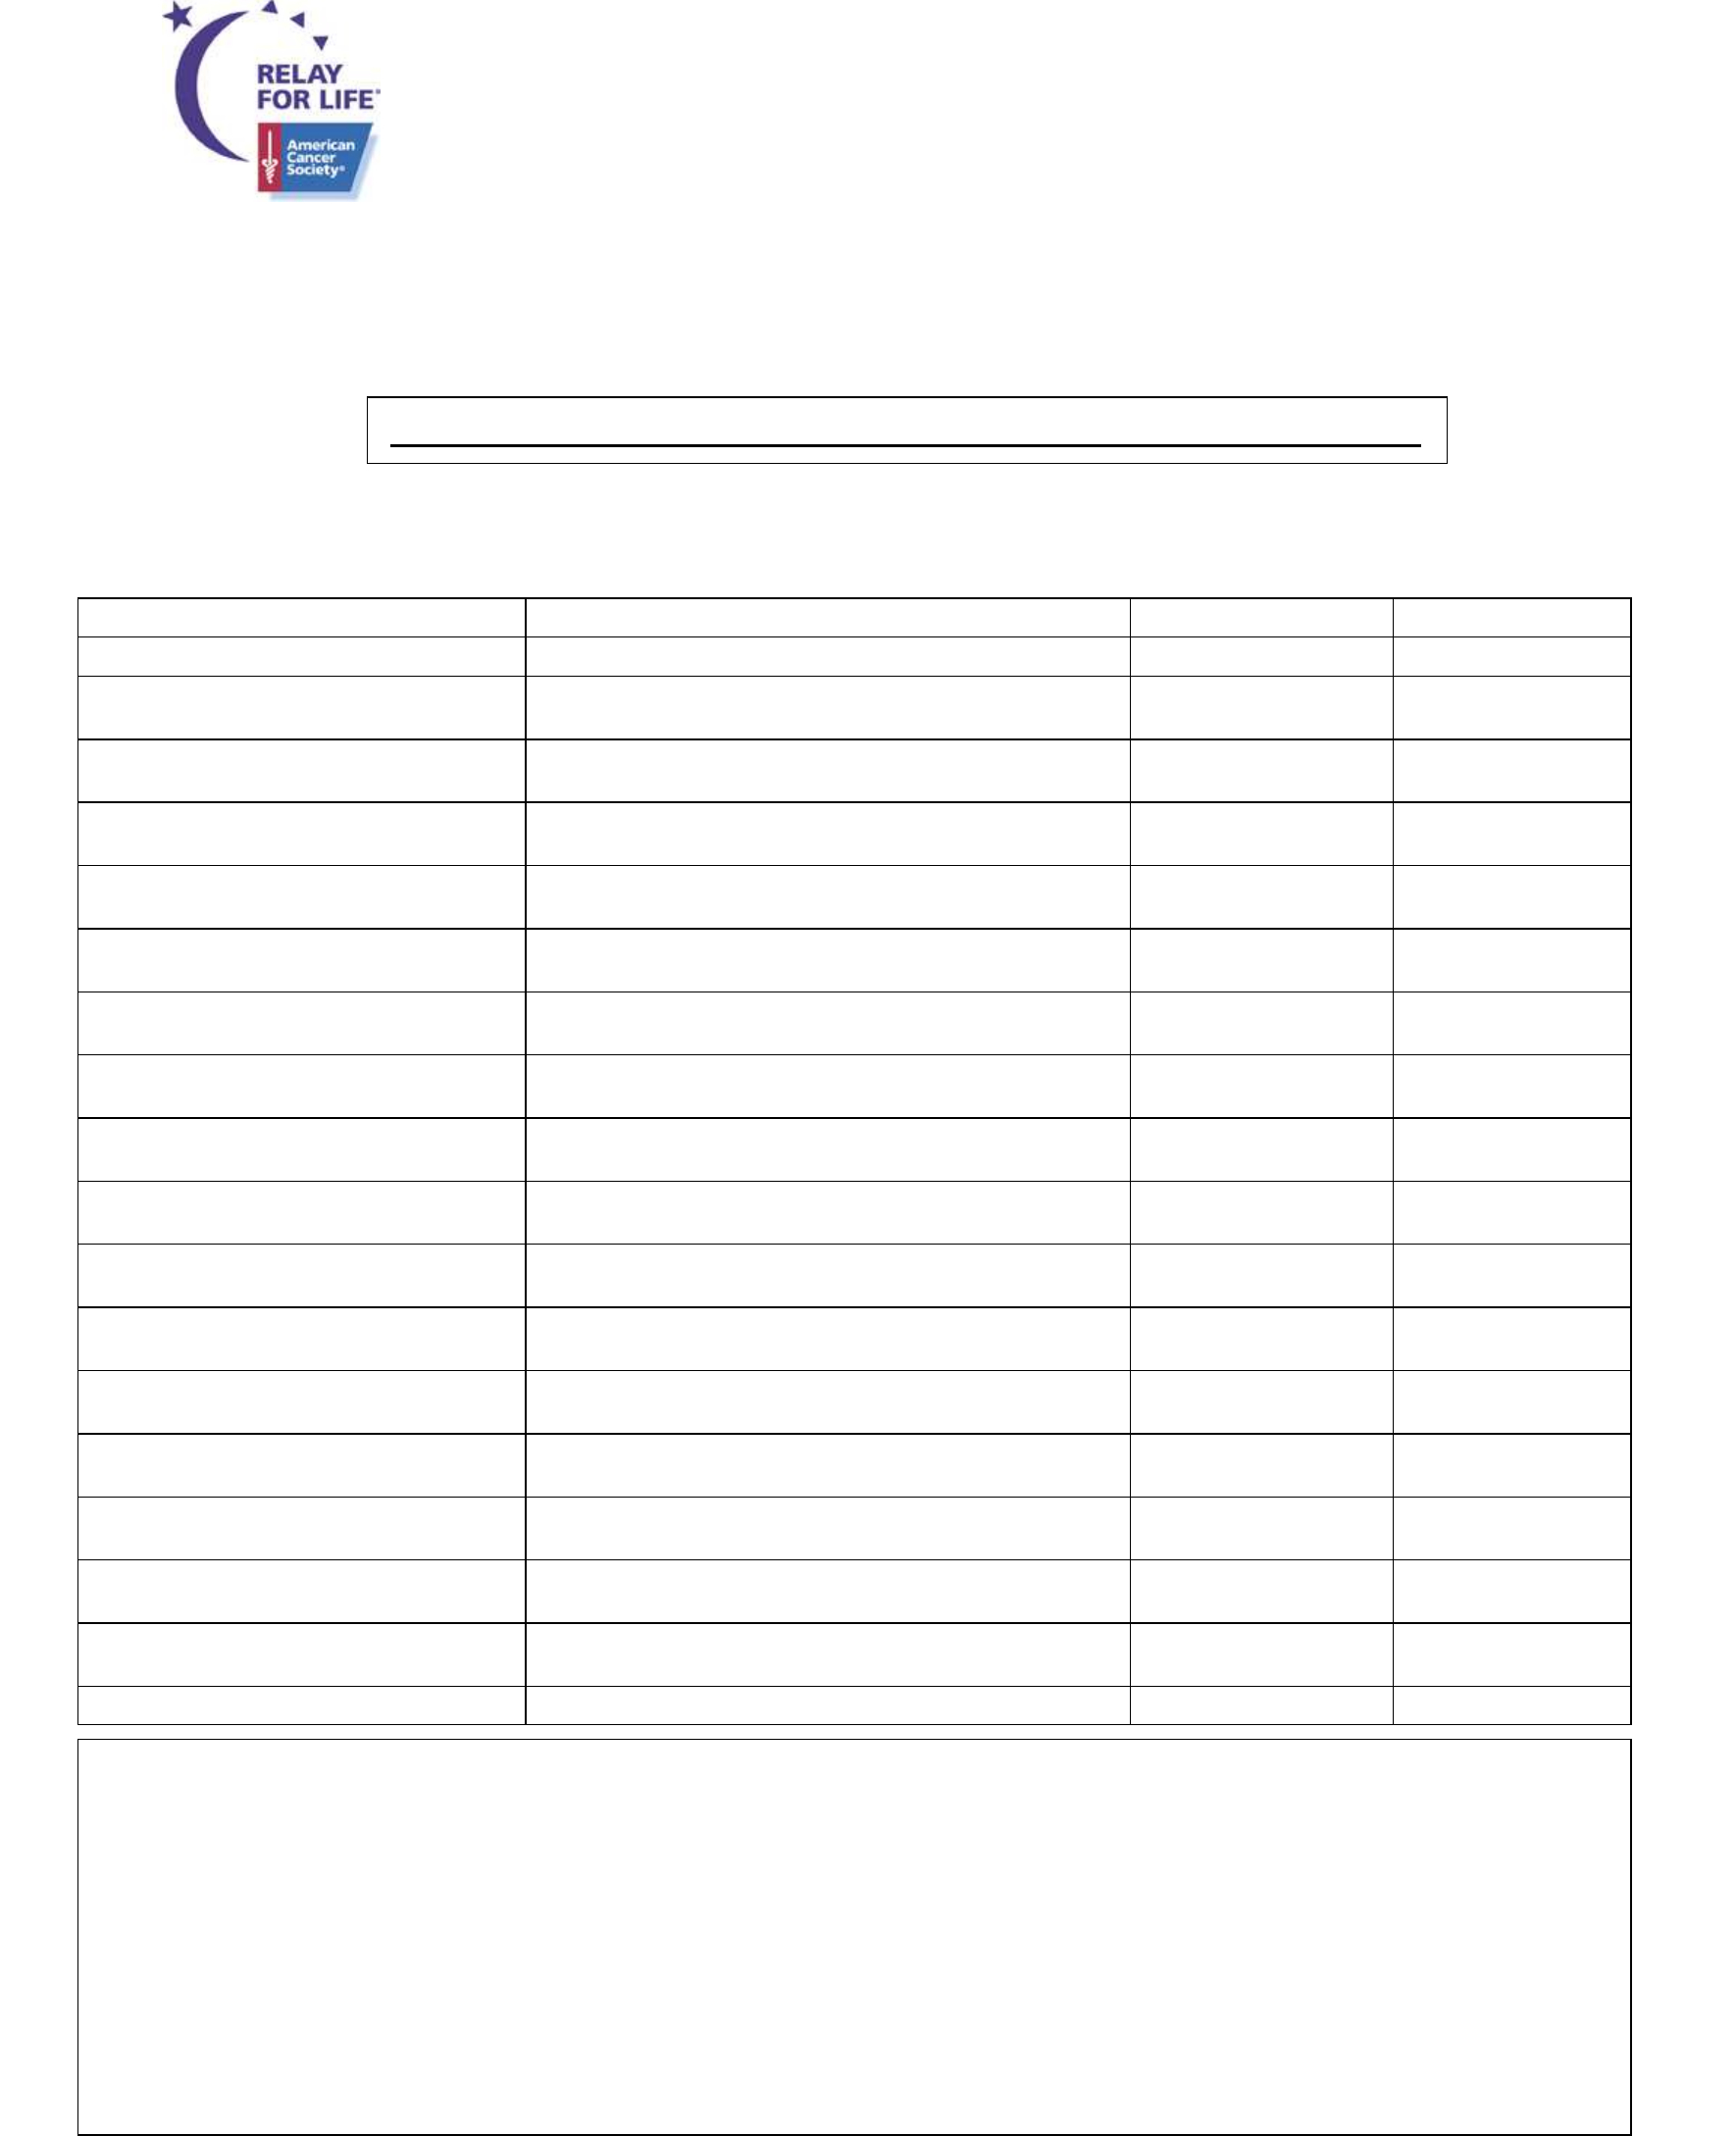 Relay For Life Donation Form – America Free Download Inside Blank Sponsorship Form Template